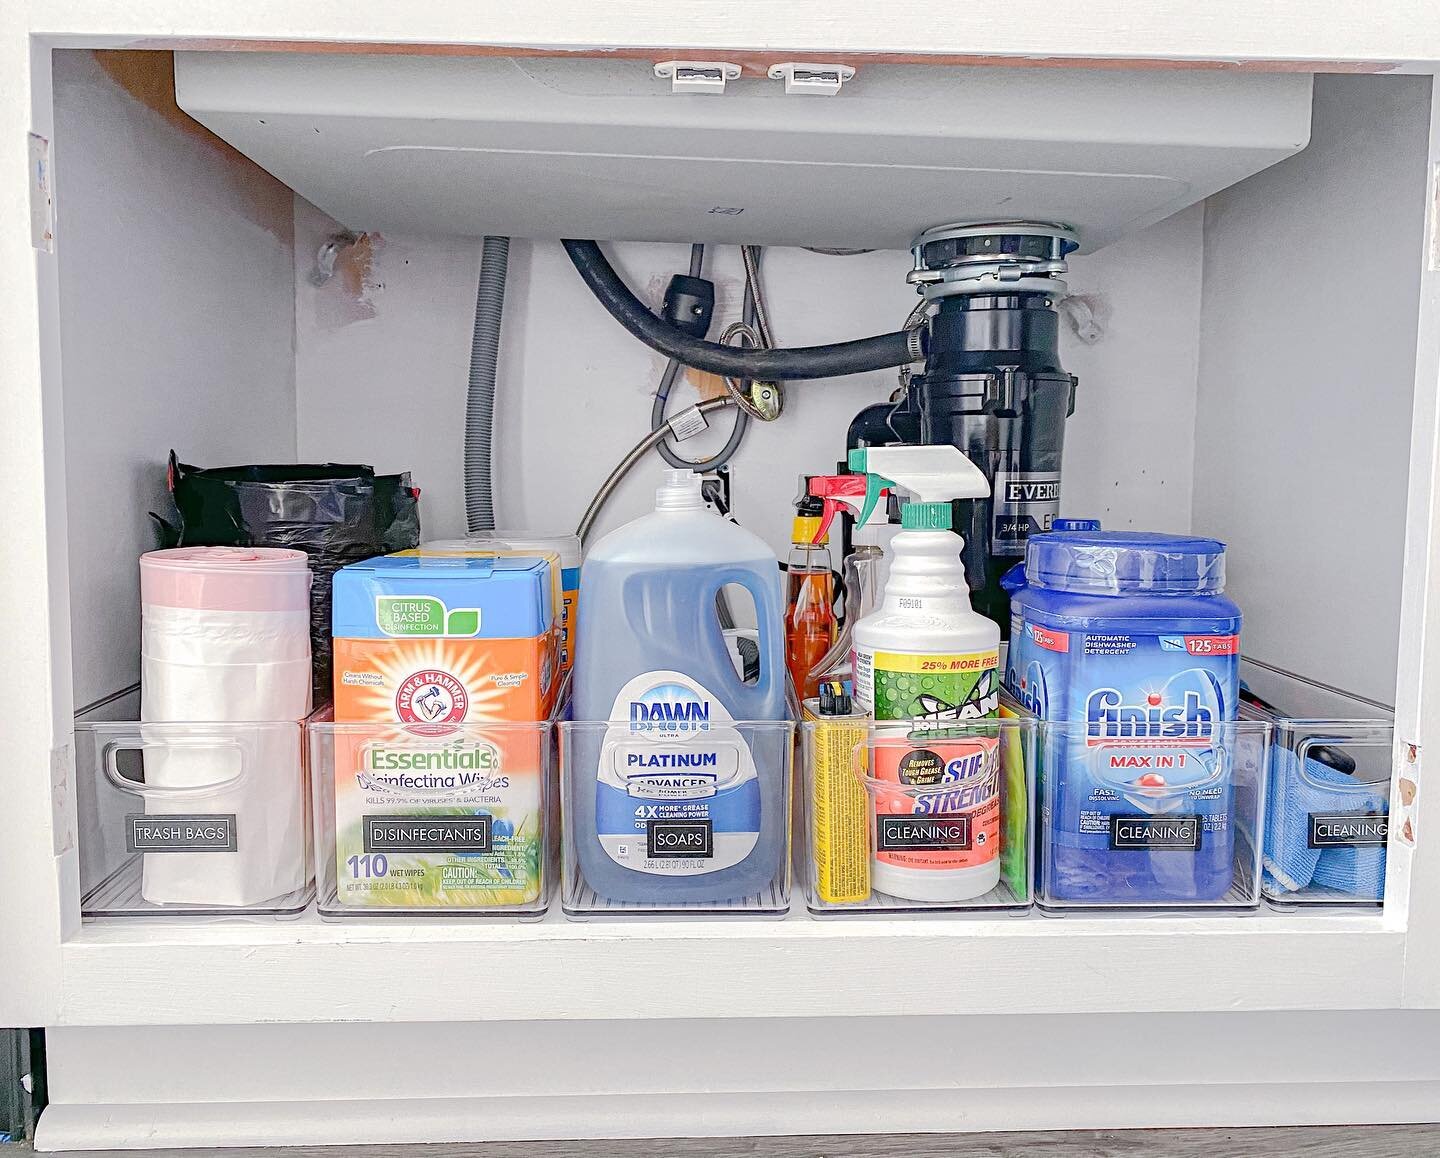 Under the kitchen sink organization! 
⠀⠀⠀⠀⠀⠀⠀⠀⠀
When organizing under your kitchen sink, it's important to make note of what products you use frequently and actively reach for. ✨
⠀⠀⠀⠀⠀⠀⠀⠀⠀
This is prime real estate in any kitchen and more specialty c